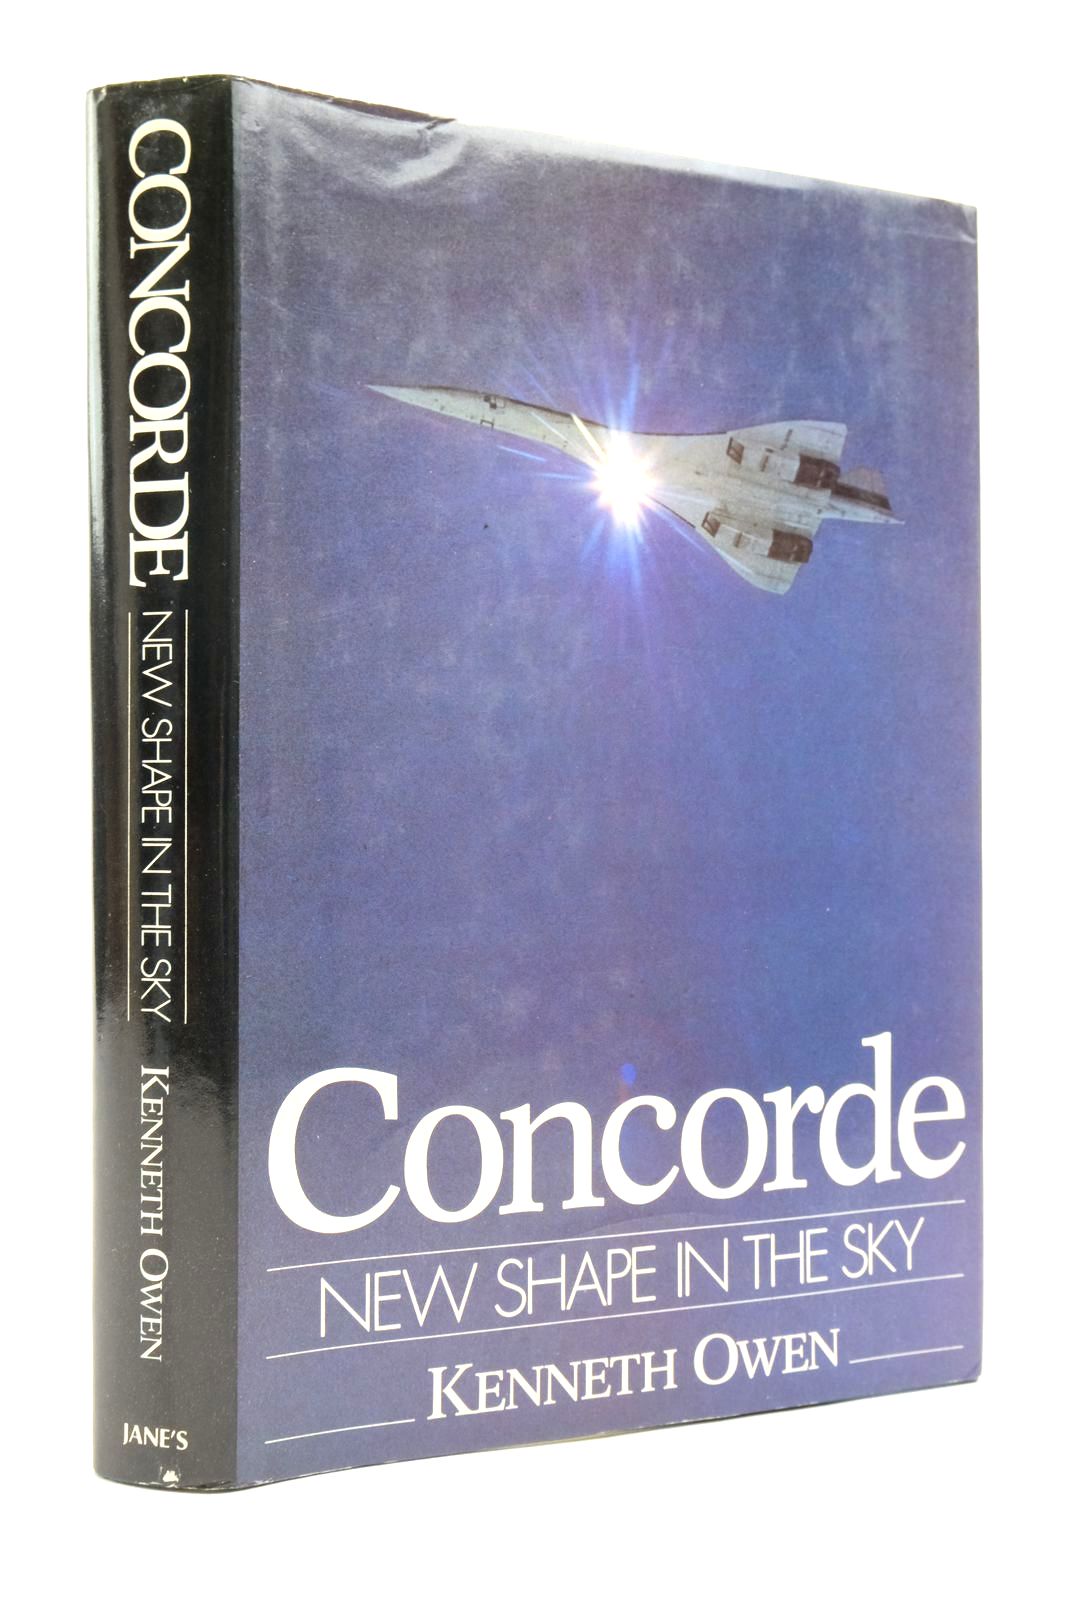 Photo of CONCORDE: NEW SHAPE IN THE SKY written by Owen, Kenneth published by Janes Publishing Co. Ltd. (STOCK CODE: 2138573)  for sale by Stella & Rose's Books